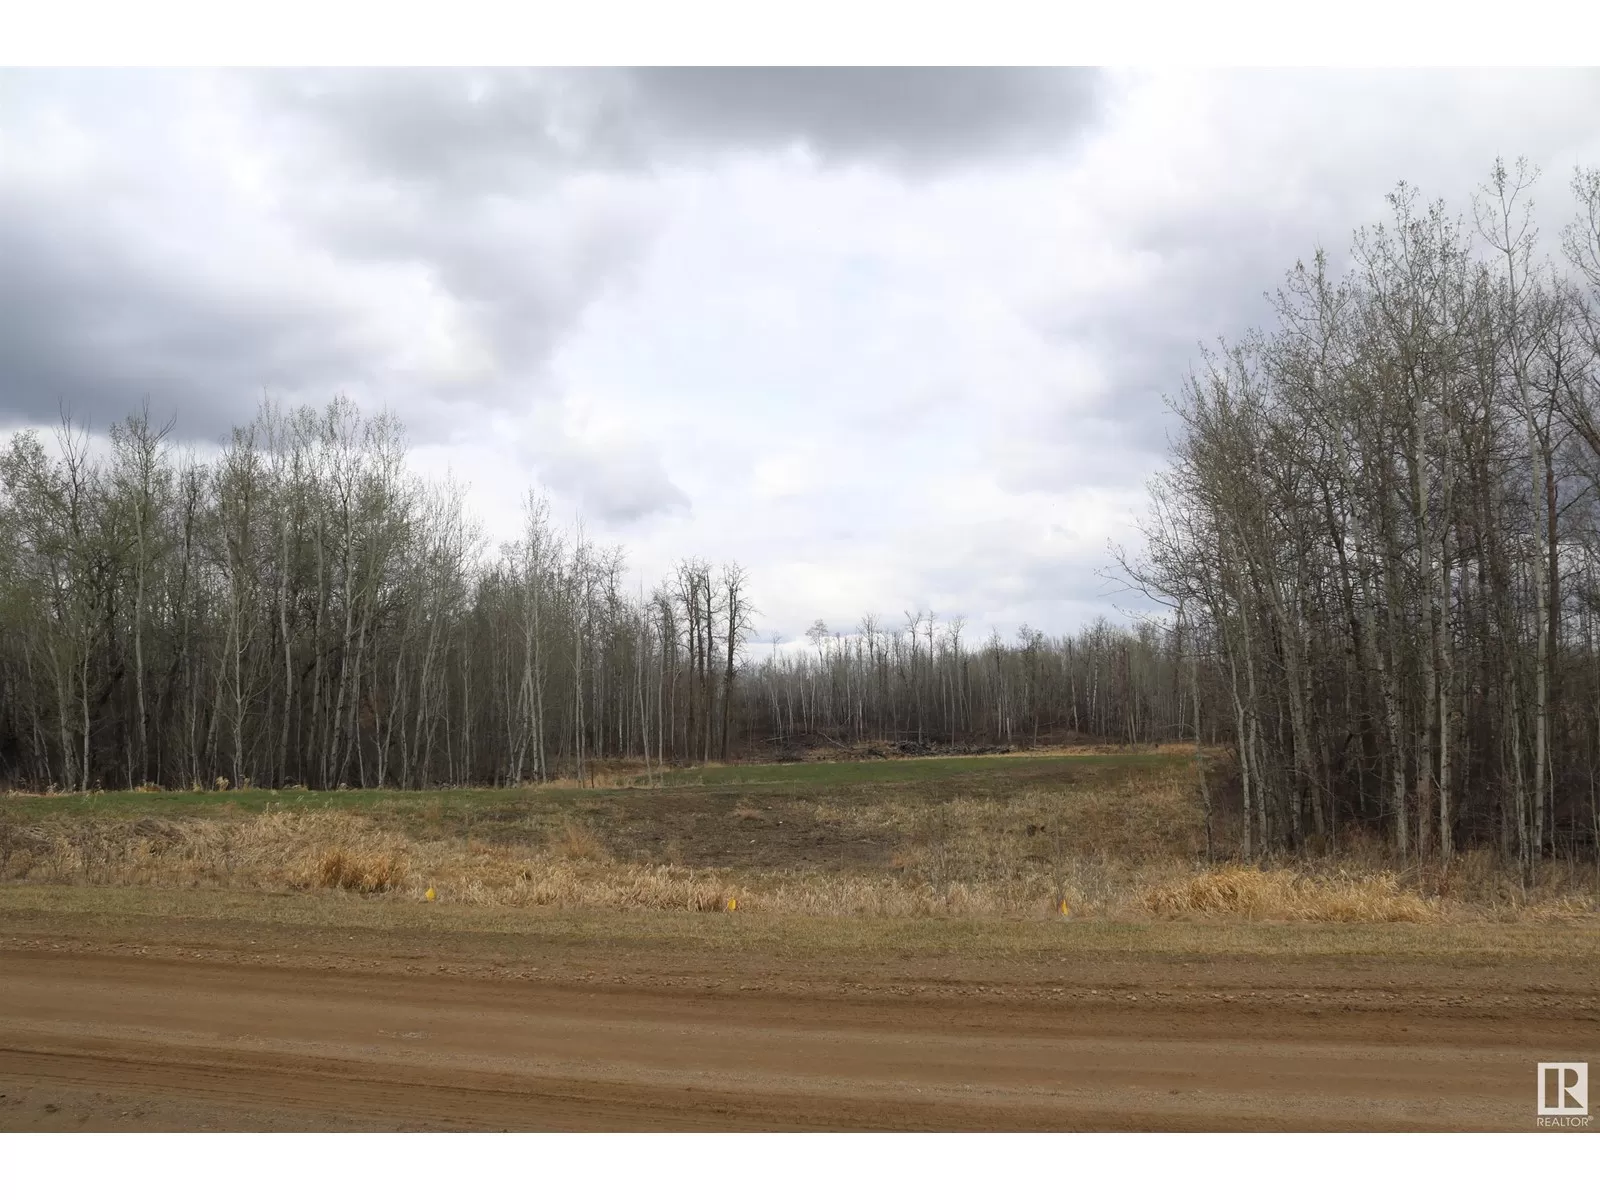 No Building for rent: 225 50072 Rge Rd 205, Rural Camrose County, Alberta T0B 2M1